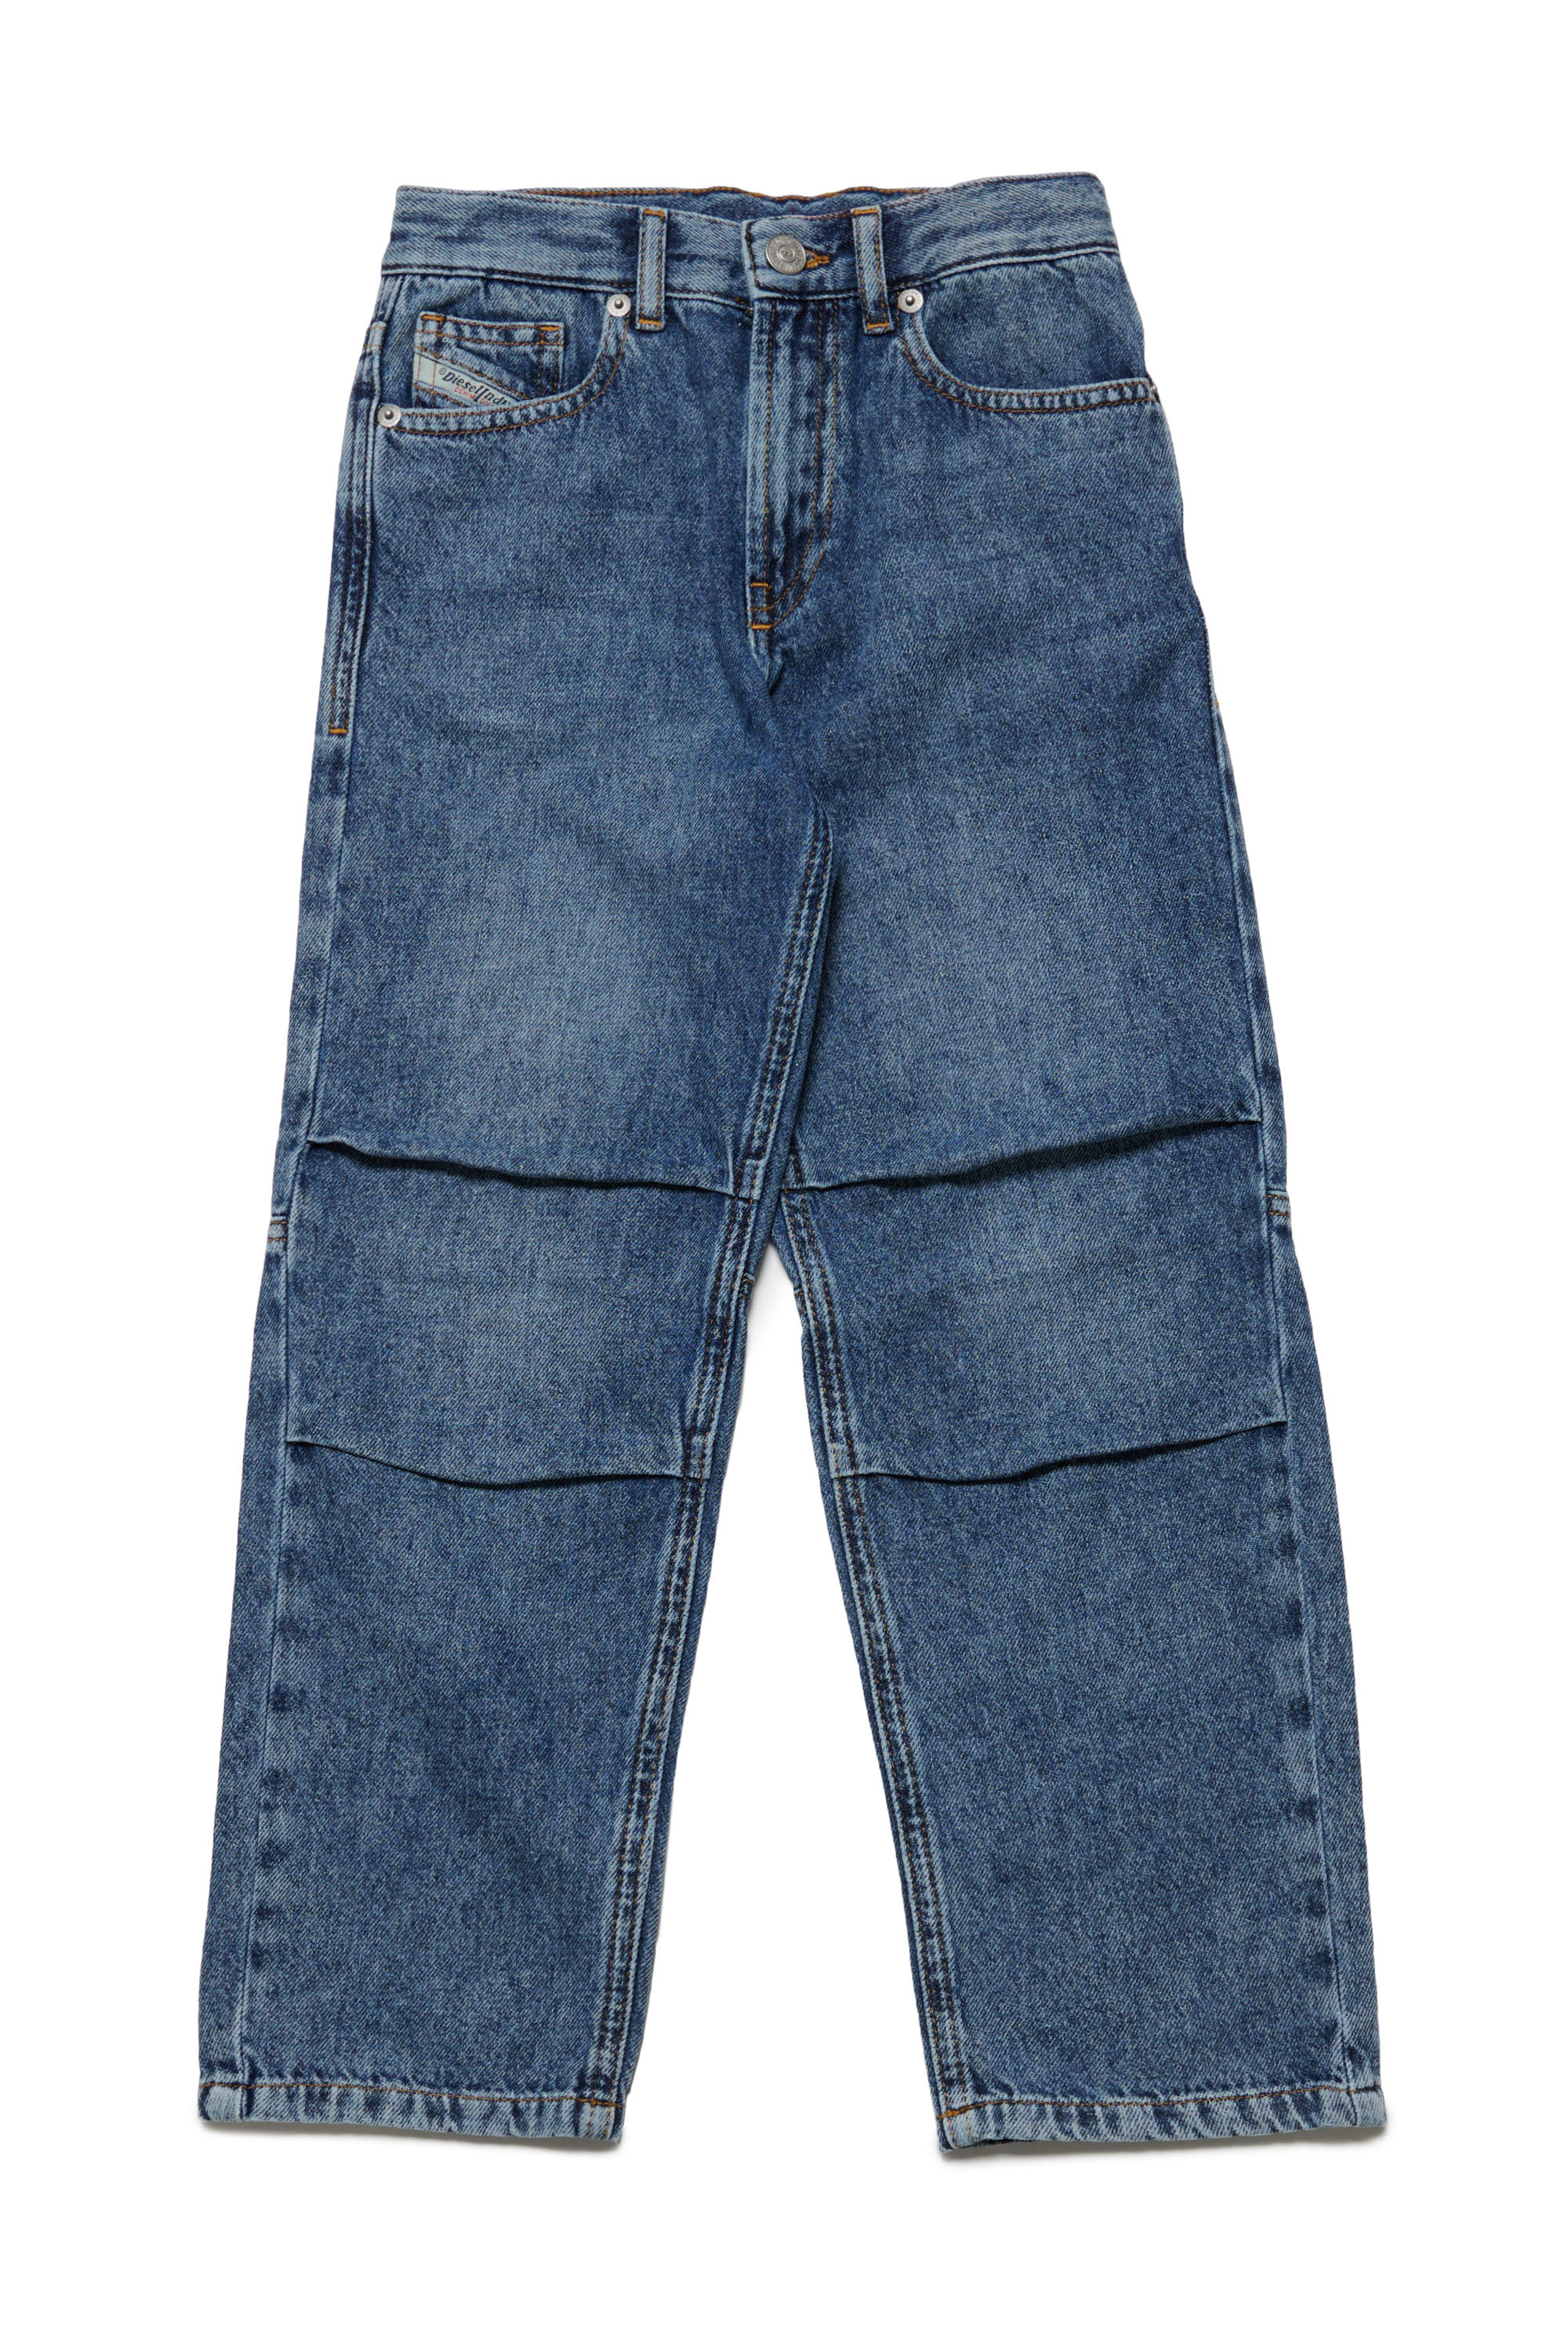 Child and Boy Jeans: Slim, Tapered, Skinny, Loose